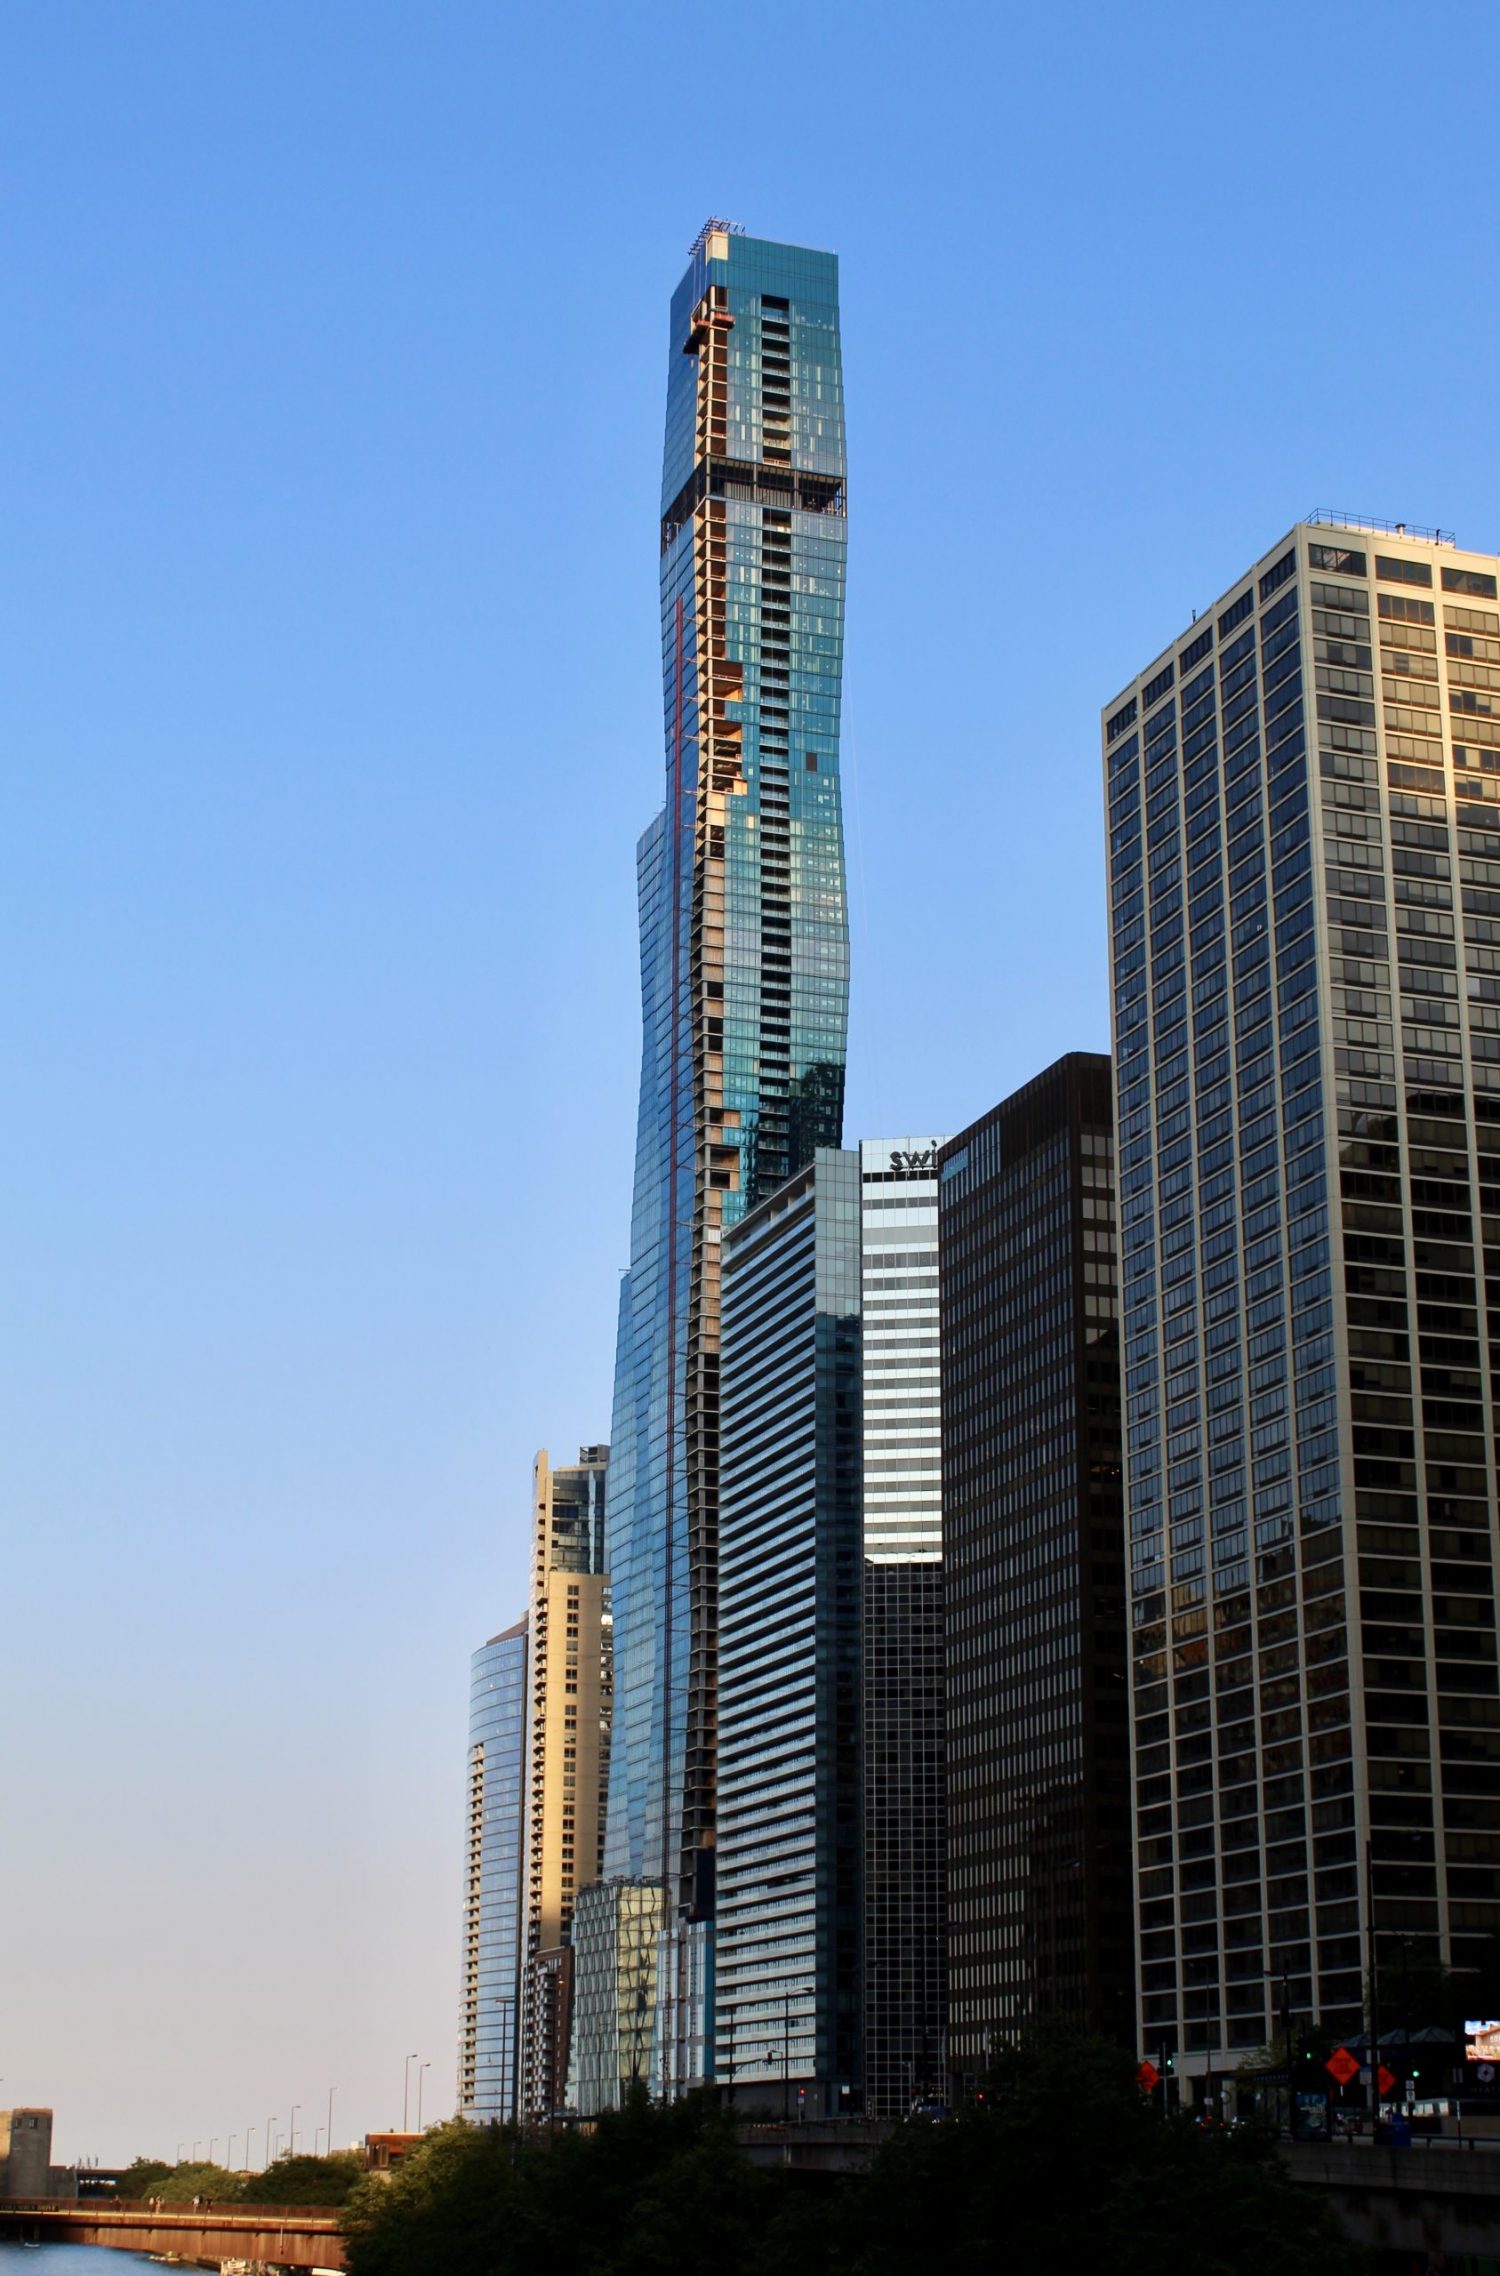 Vista Tower, facing east towards the mouth of the Chicago River